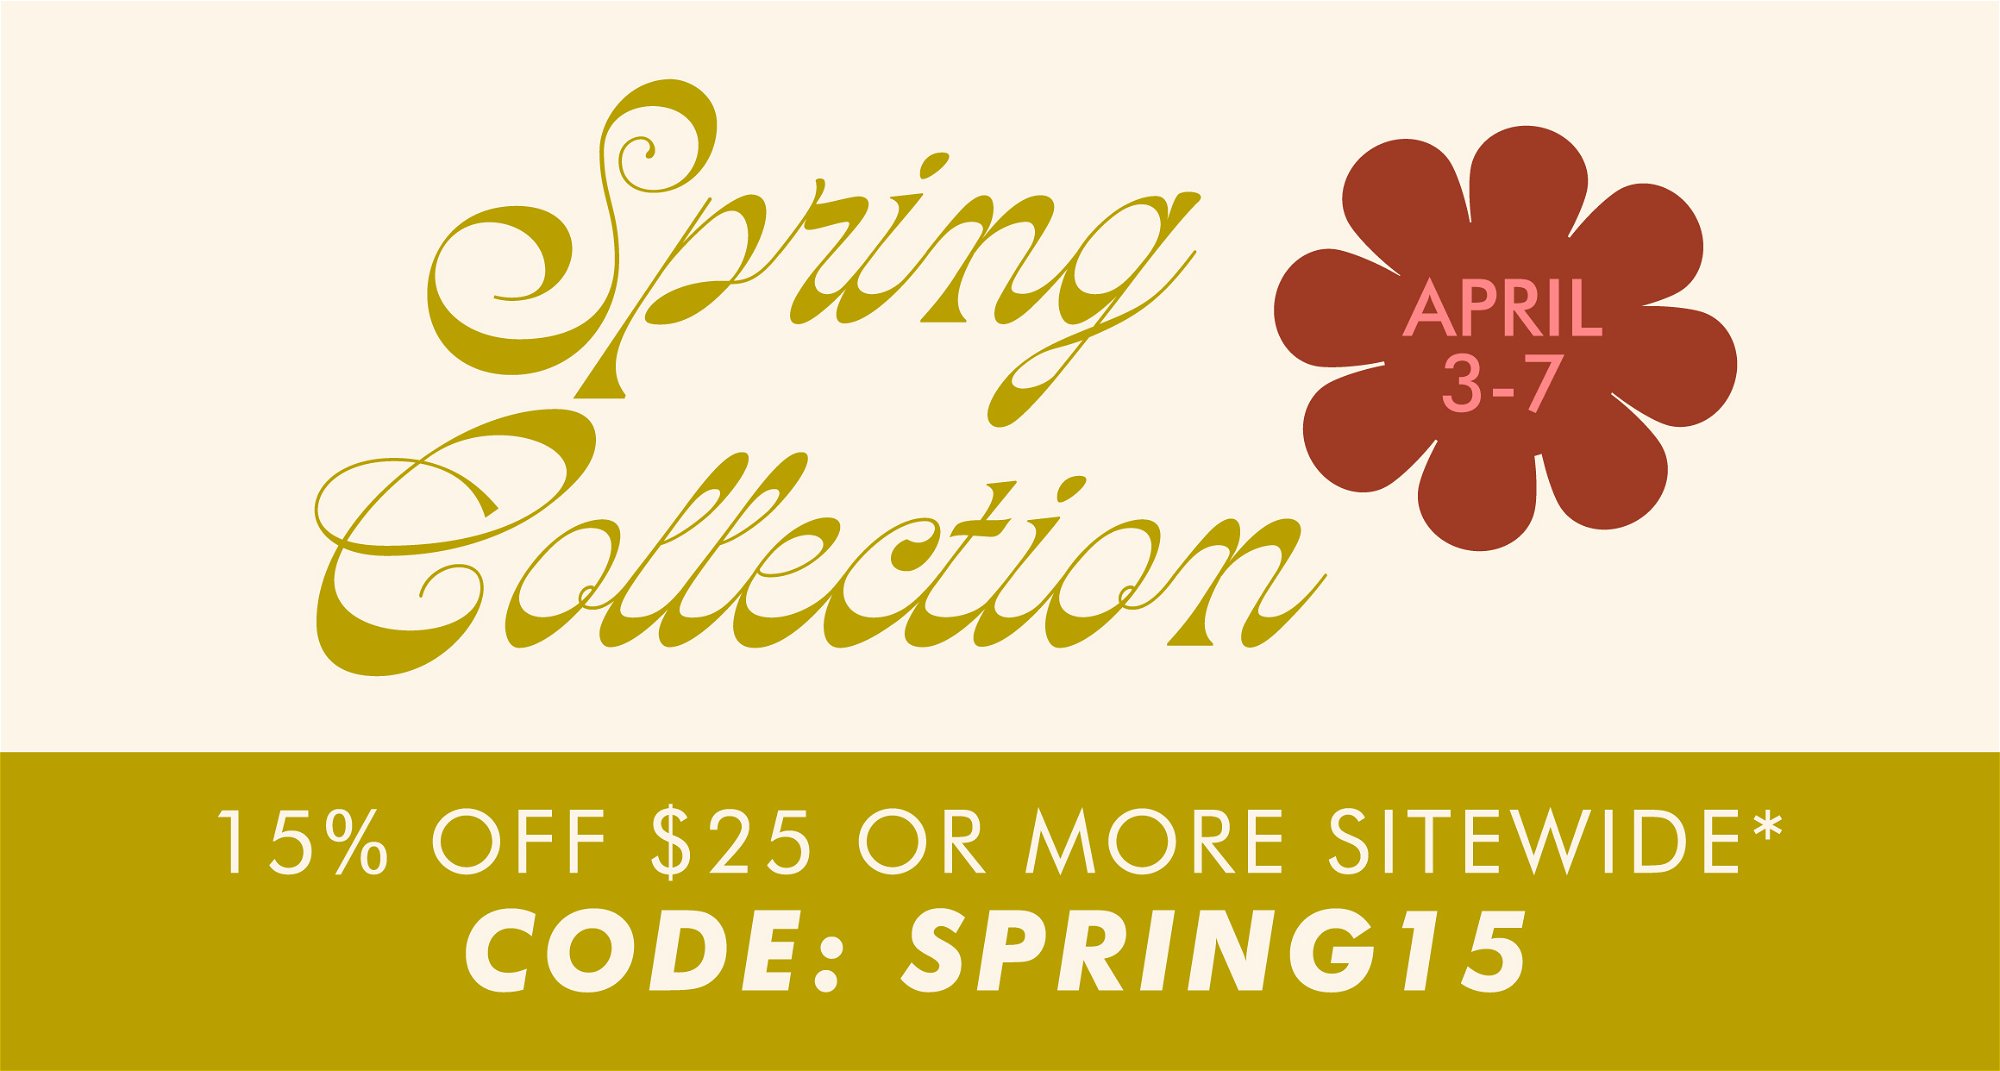 Spring Collection April 3-7. 15% off $25 or more sitewide with code SPRING15